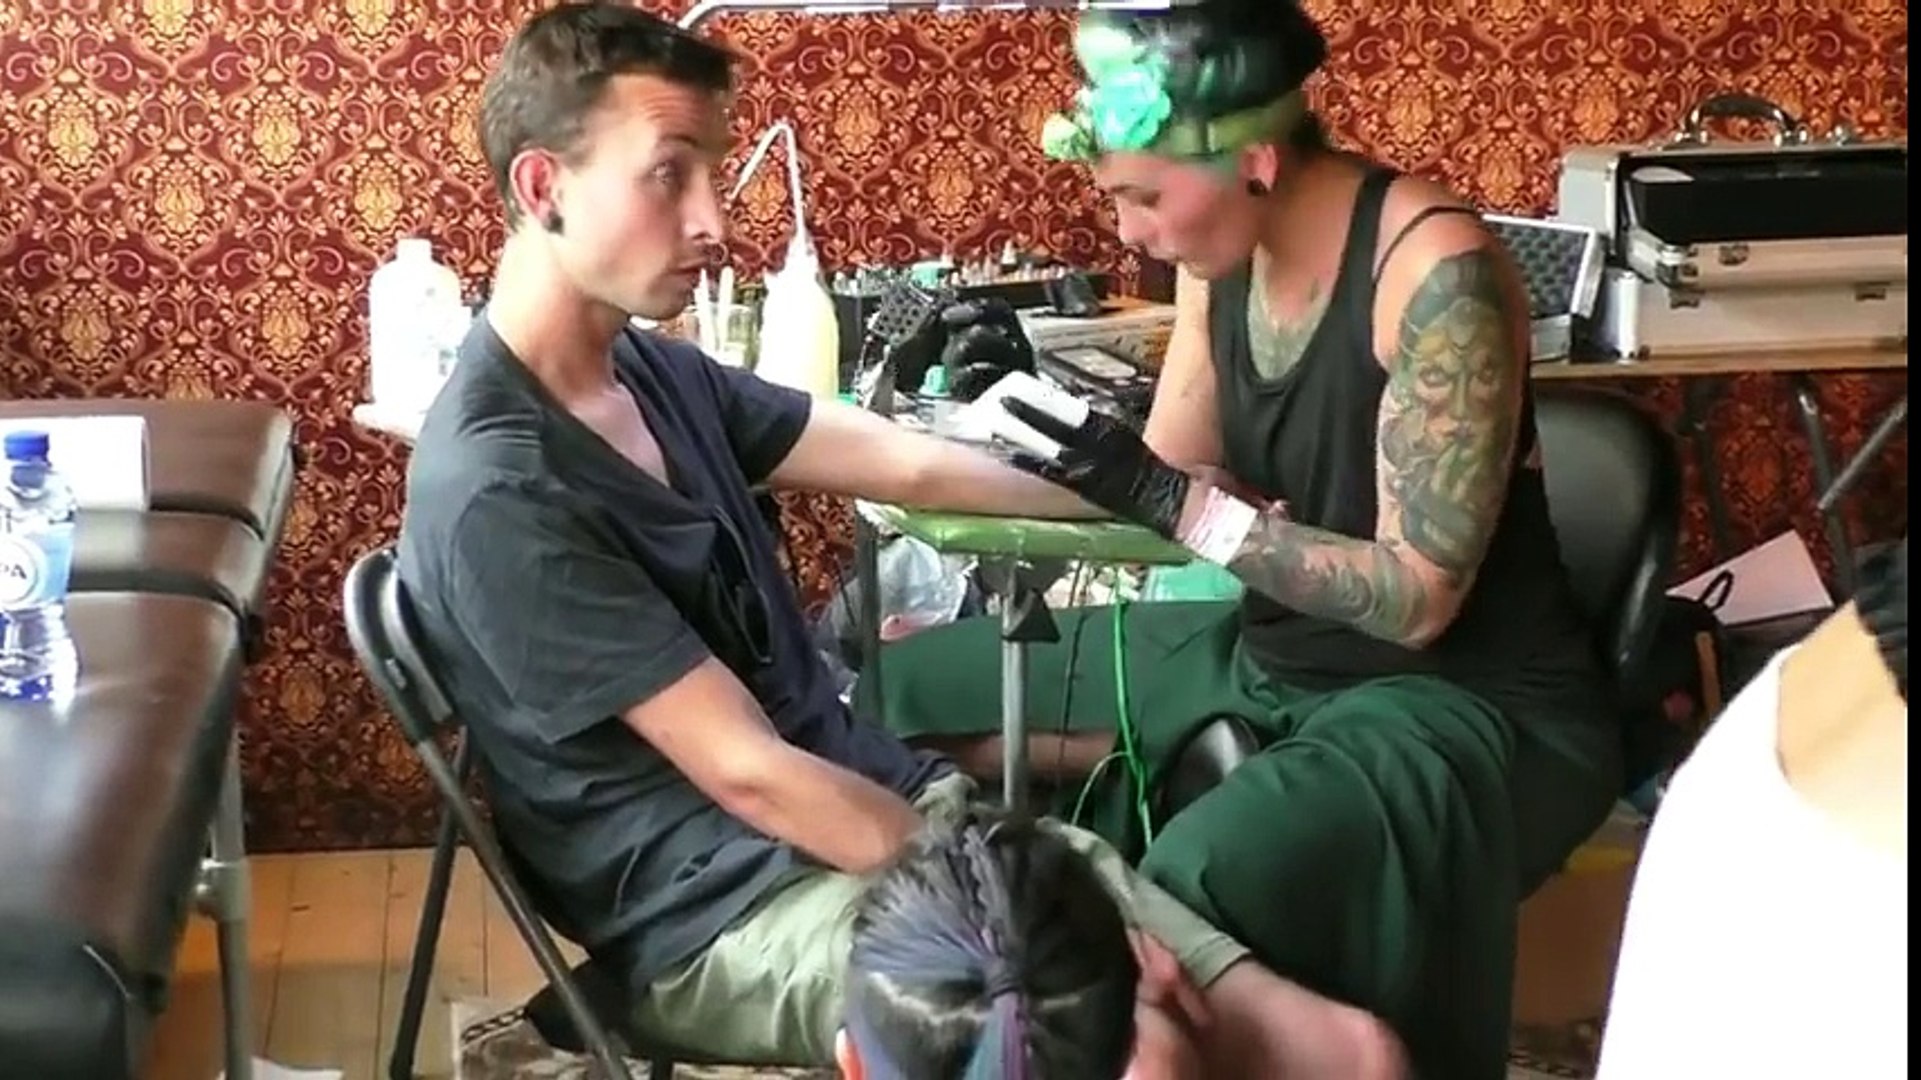 Insane! These people got a tattoo done at Tomorrowland - Video Dailymotion